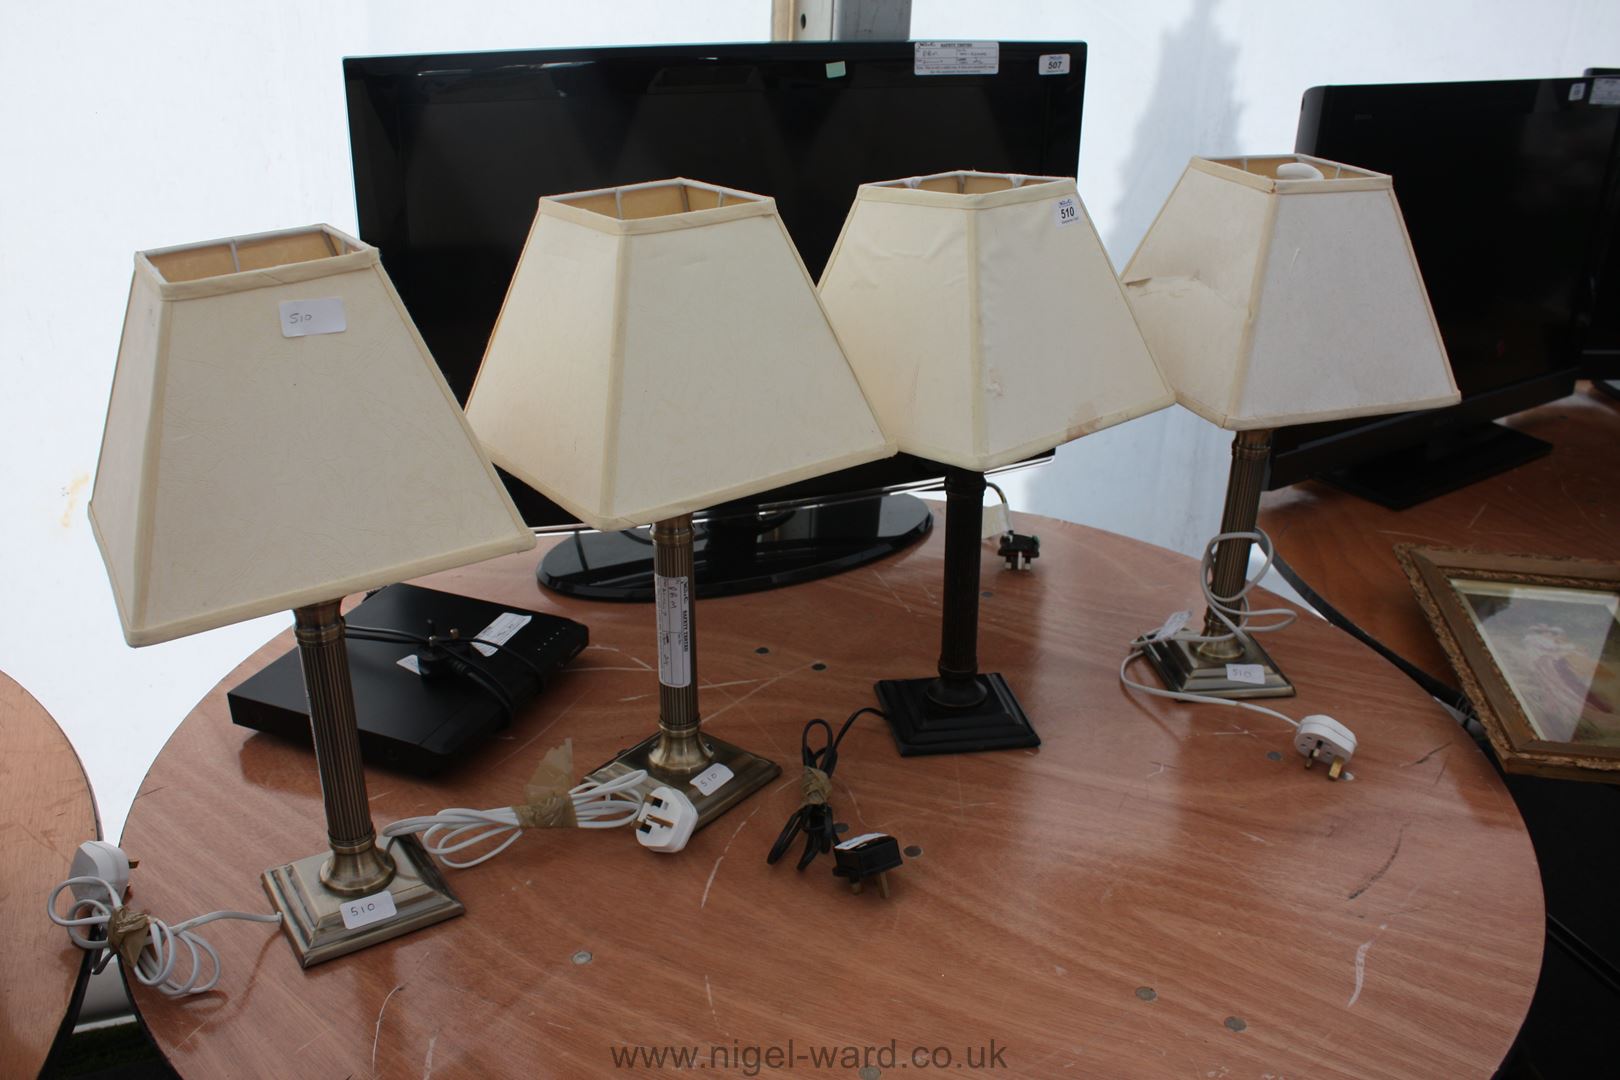 Two modern decorative Table Lamps with dark metal finish and two others